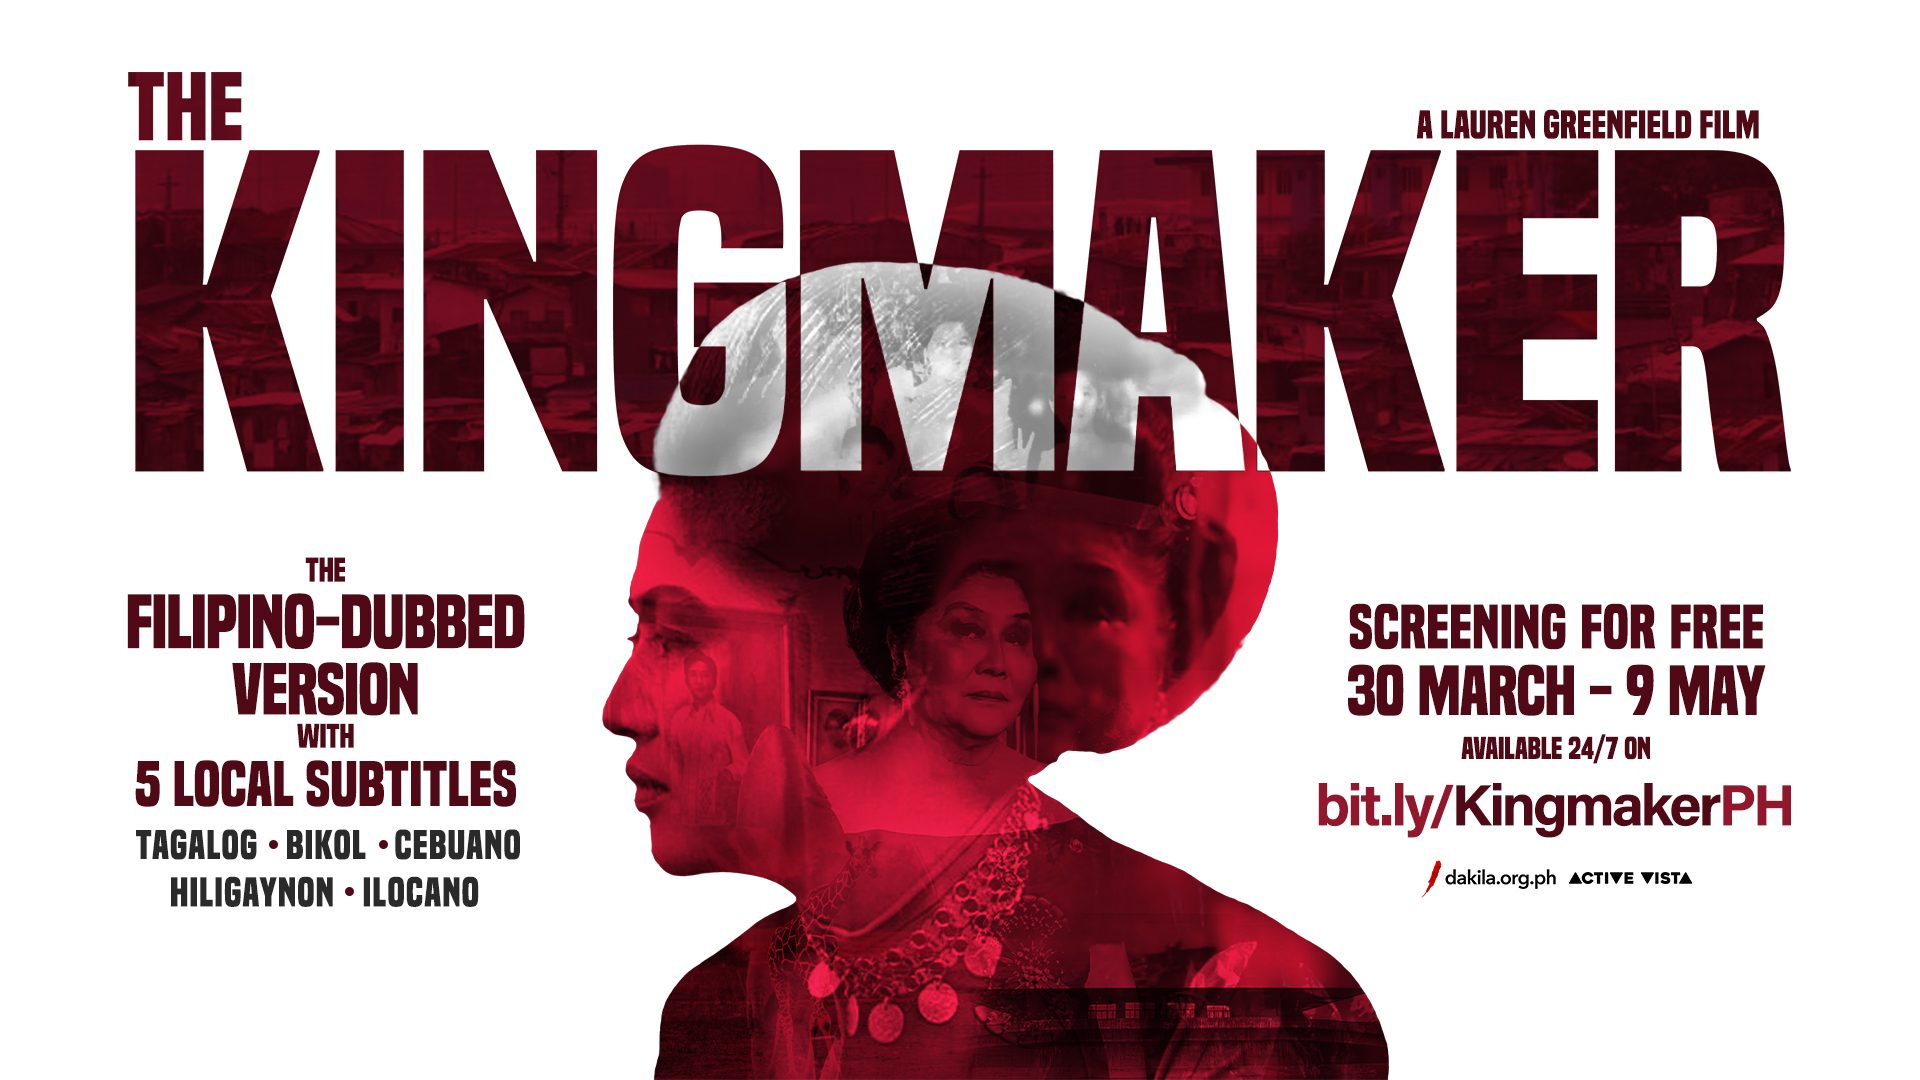 You can now watch ‘The Kingmaker’ in Tagalog